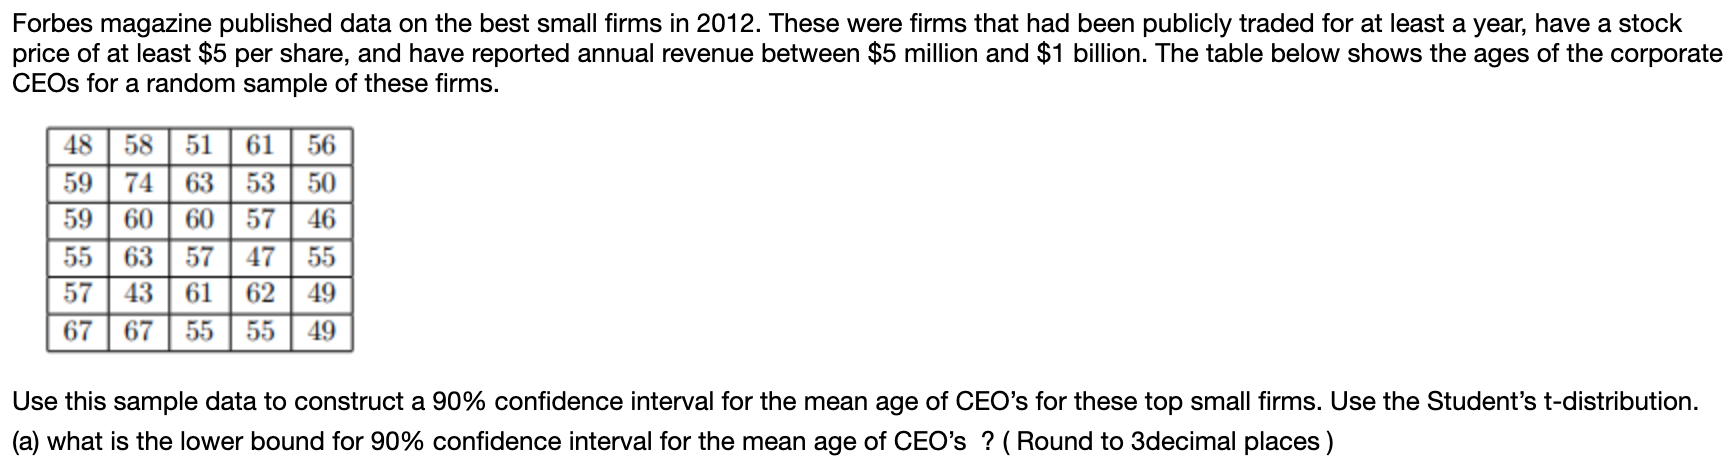 Forbes magazine published data on the best small firms in 2012. These were firms that had been publicly traded for at least a year, have a stock
price of at least $5 per share, and have reported annual revenue between $5 million and $1 billion. The table below shows the ages of the corporate
CEOS for a random sample of these firms.
58 51 61
48
56
59
74
63
53
50
59
60
60
57
46
55
635747
55
57
43
61
62
49
67 5555
67
49
Use this sample data to construct a 90% confidence interval for the mean age of CEO's for these top small firms. Use the Student's t-distribution
(a) what is the lower bound for 90% confidence interval for the mean age of CEO's? (Round to 3decimal places)
